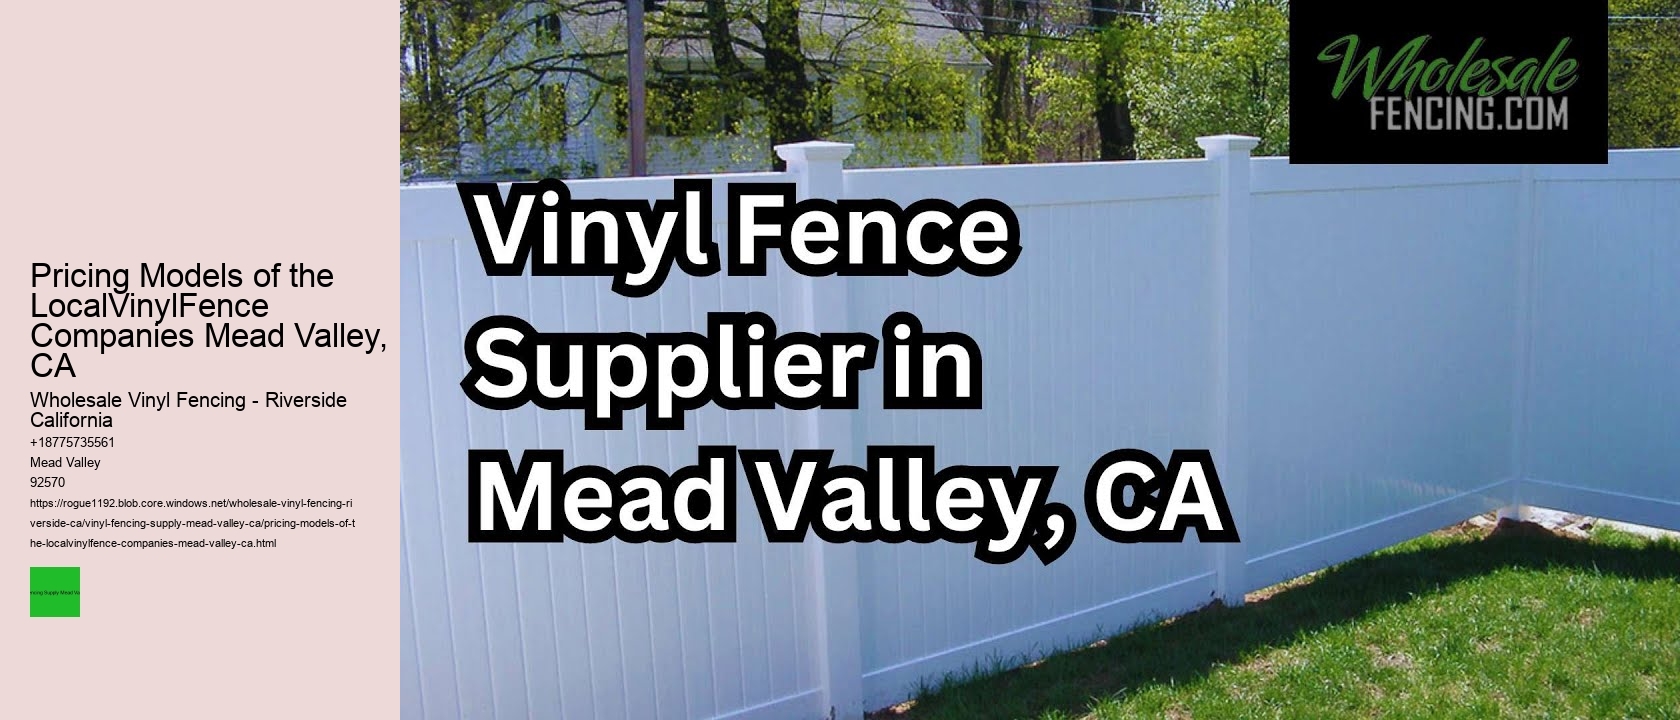 Pricing Models of the LocalVinylFence Companies Mead Valley, CA